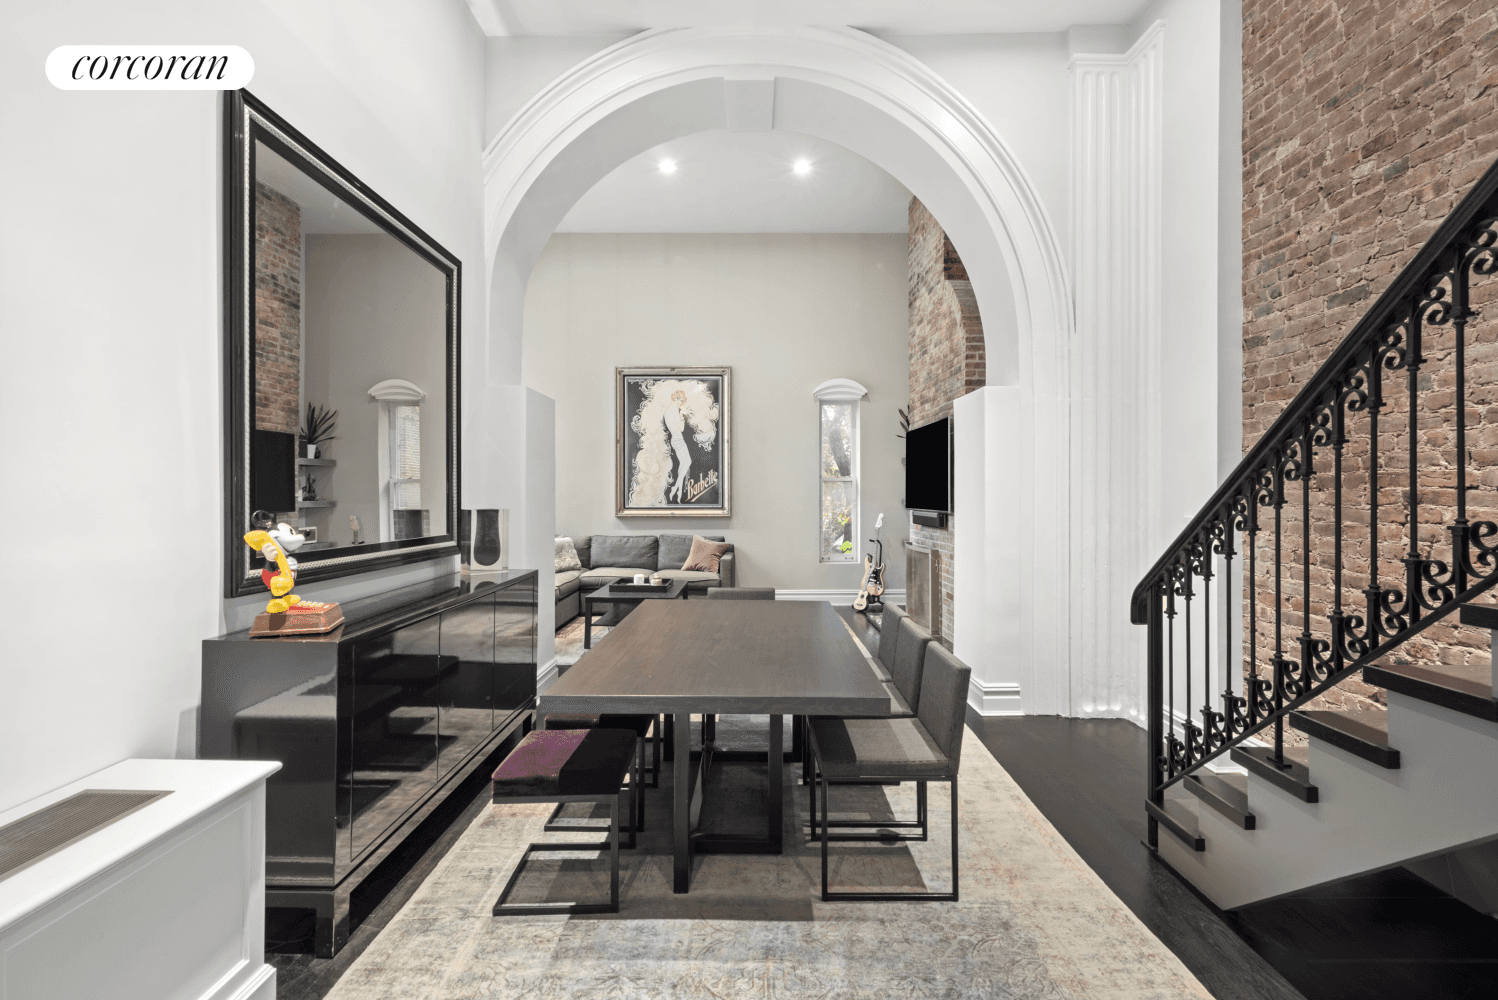 Welcome home to your turn key Greenwich Village architectural dream home.